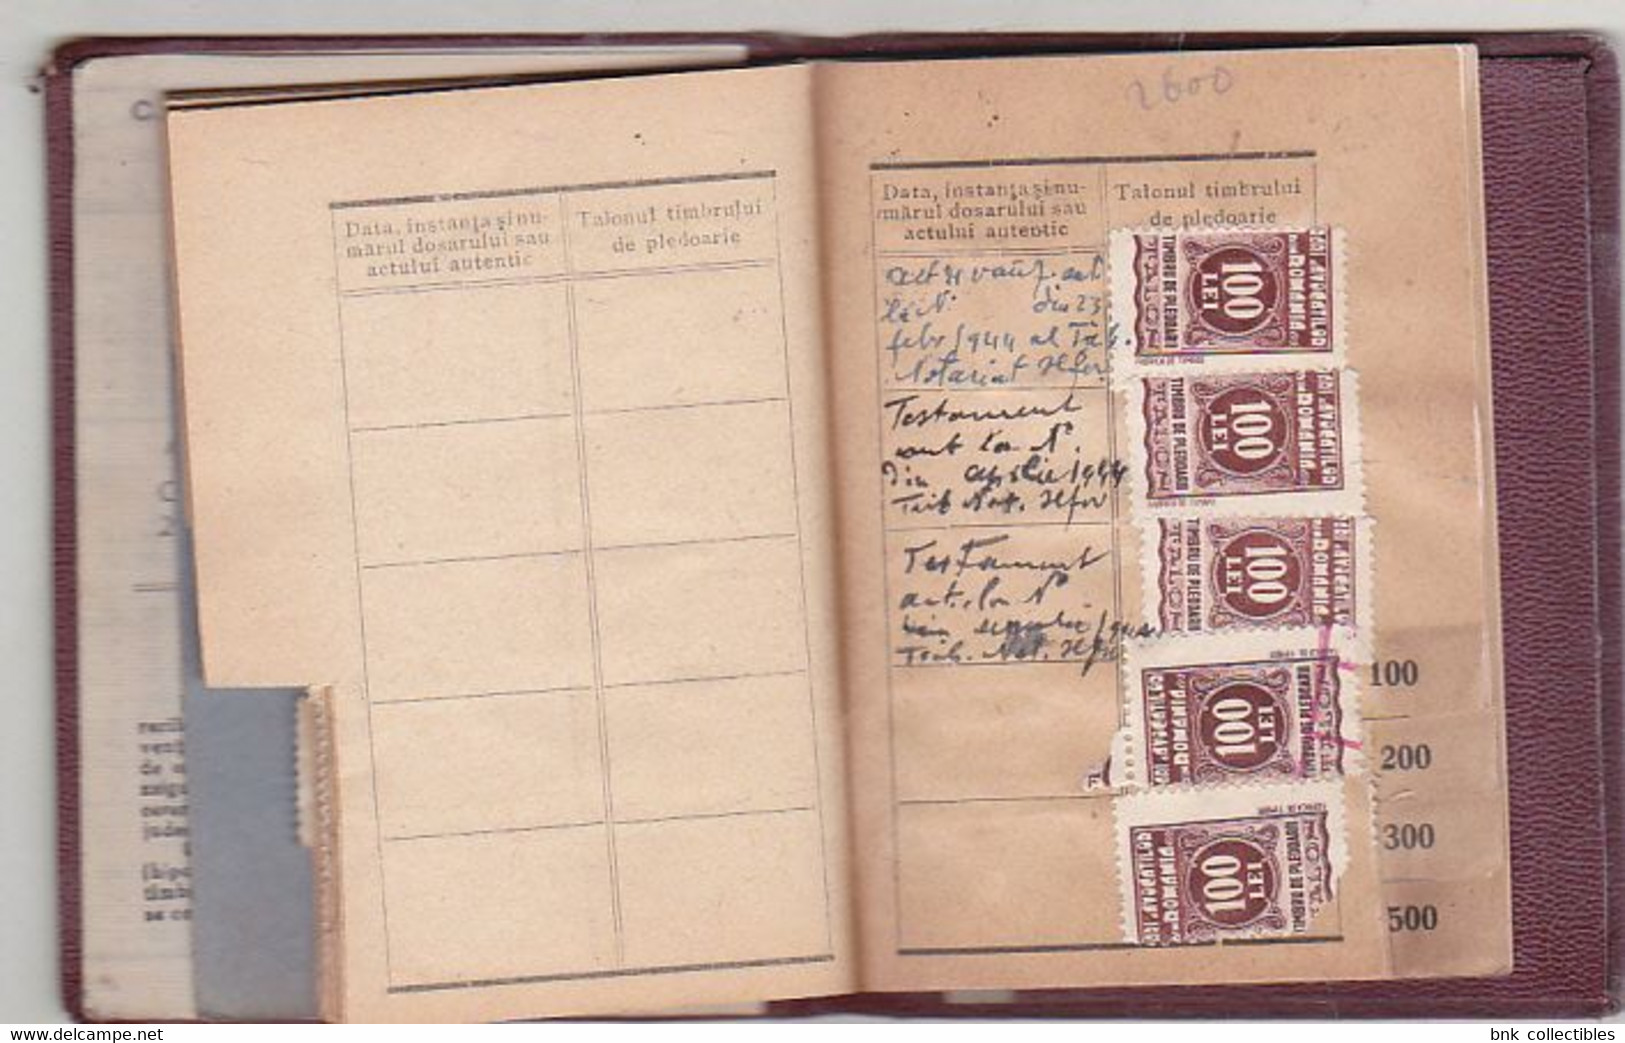 Romania old revenue stamps - 1944 Booklet - The Central Insurance House of Lawyers in Romania